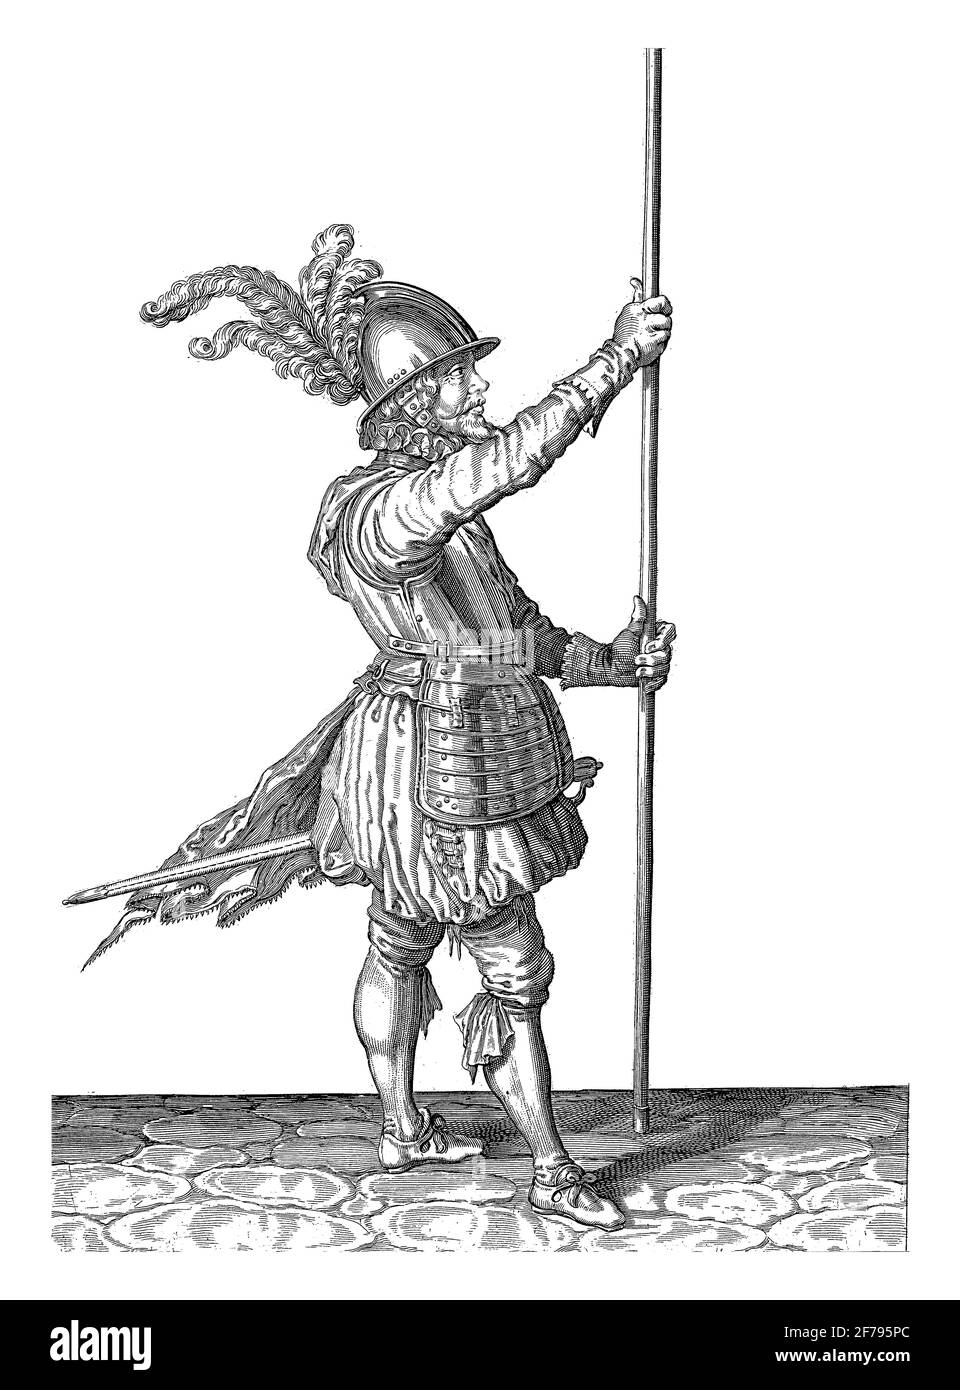 A soldier, full-length, to the right, holding a skewer (lance) with both hands upright in front of him slightly above the ground, vintage engraving. Stock Photo